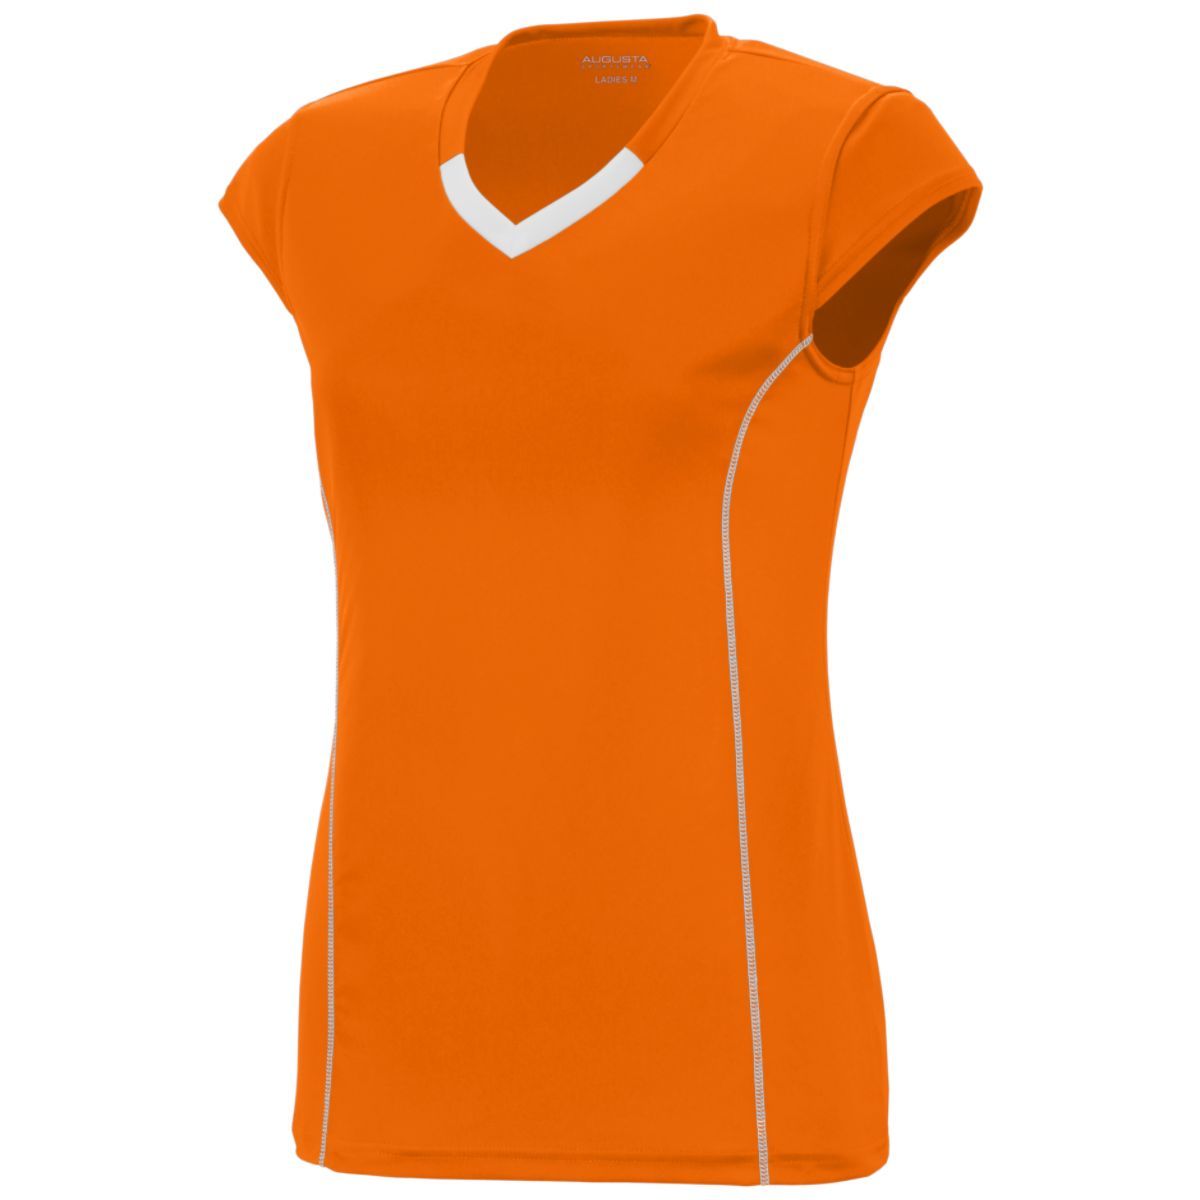 Augusta Sportswear Girls Blash Jersey in Power Orange/White  -Part of the Girls, Augusta-Products, Volleyball, Girls-Jersey, Shirts product lines at KanaleyCreations.com